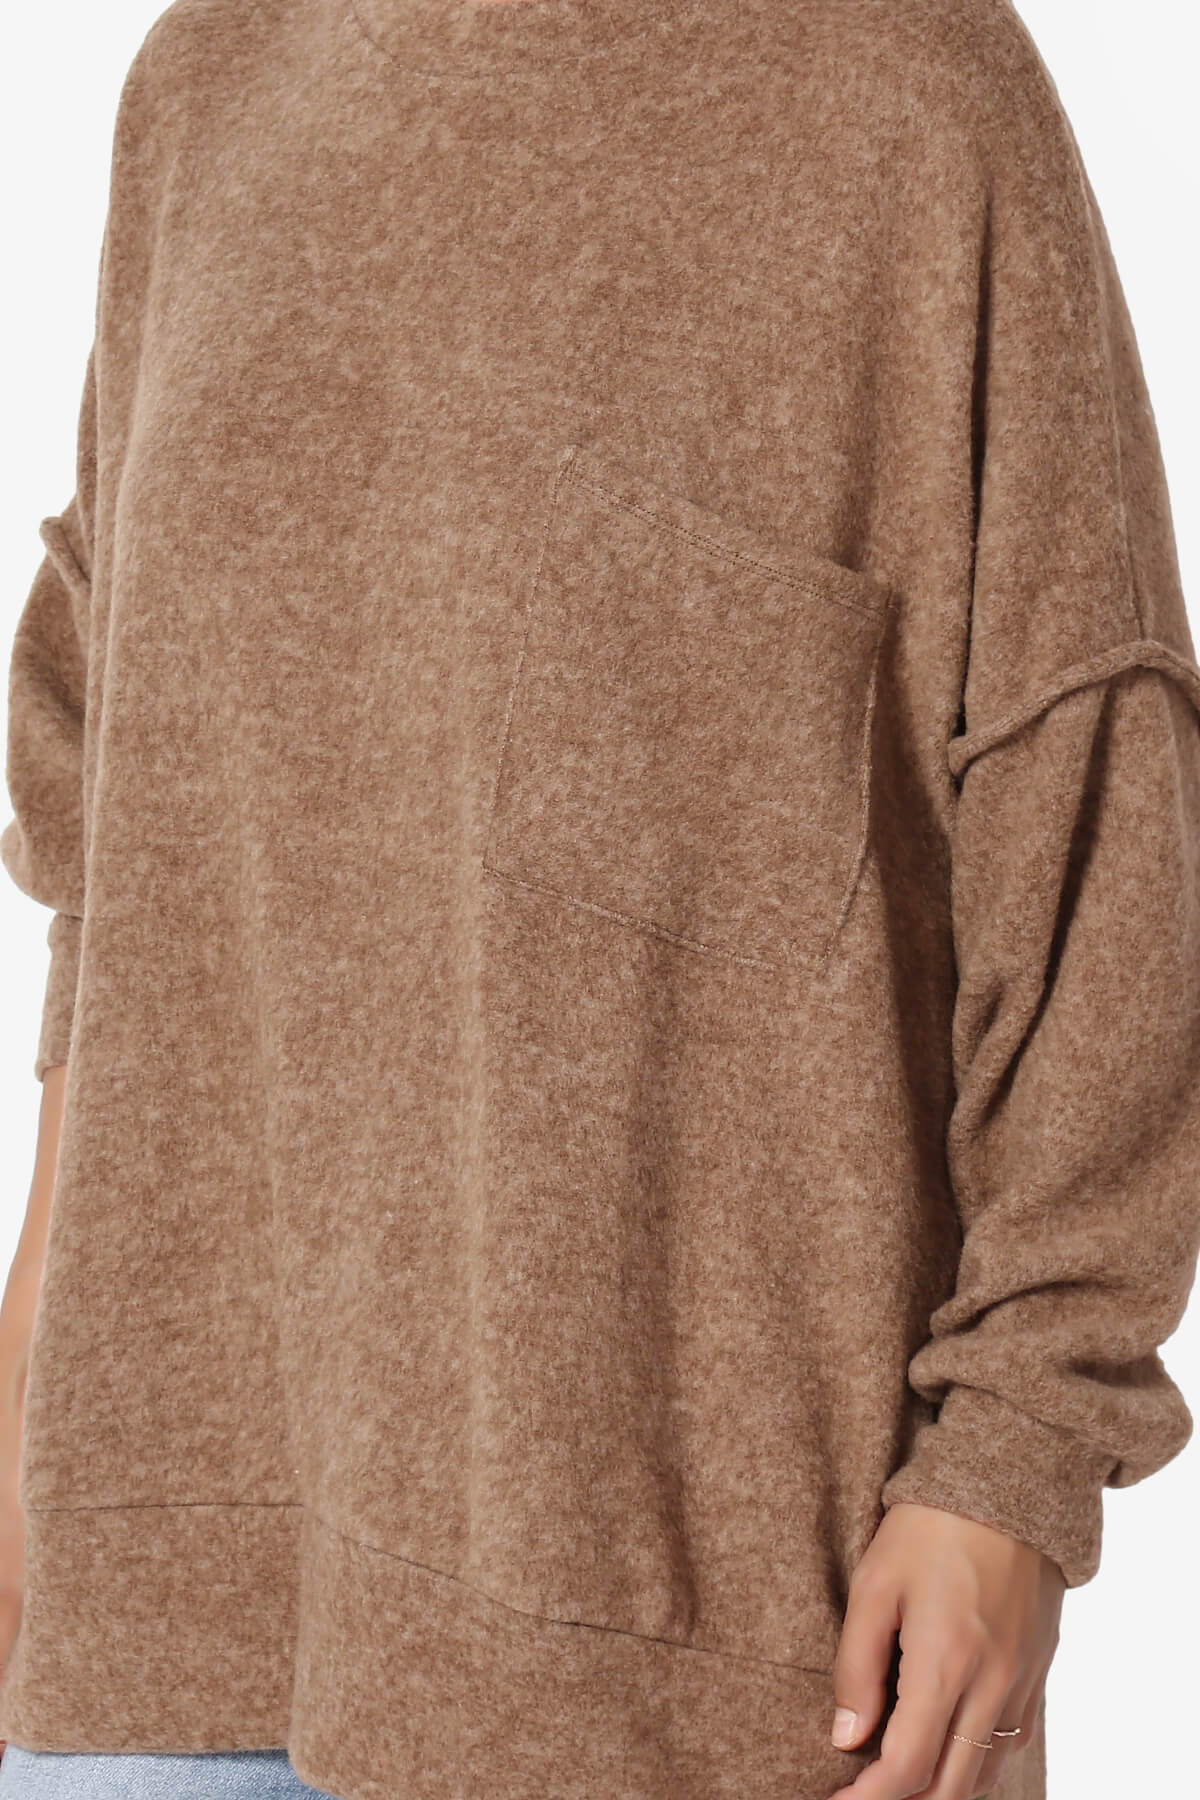 Load image into Gallery viewer, Breccan Blushed Knit Oversized Sweater DARK CAMEL_5
